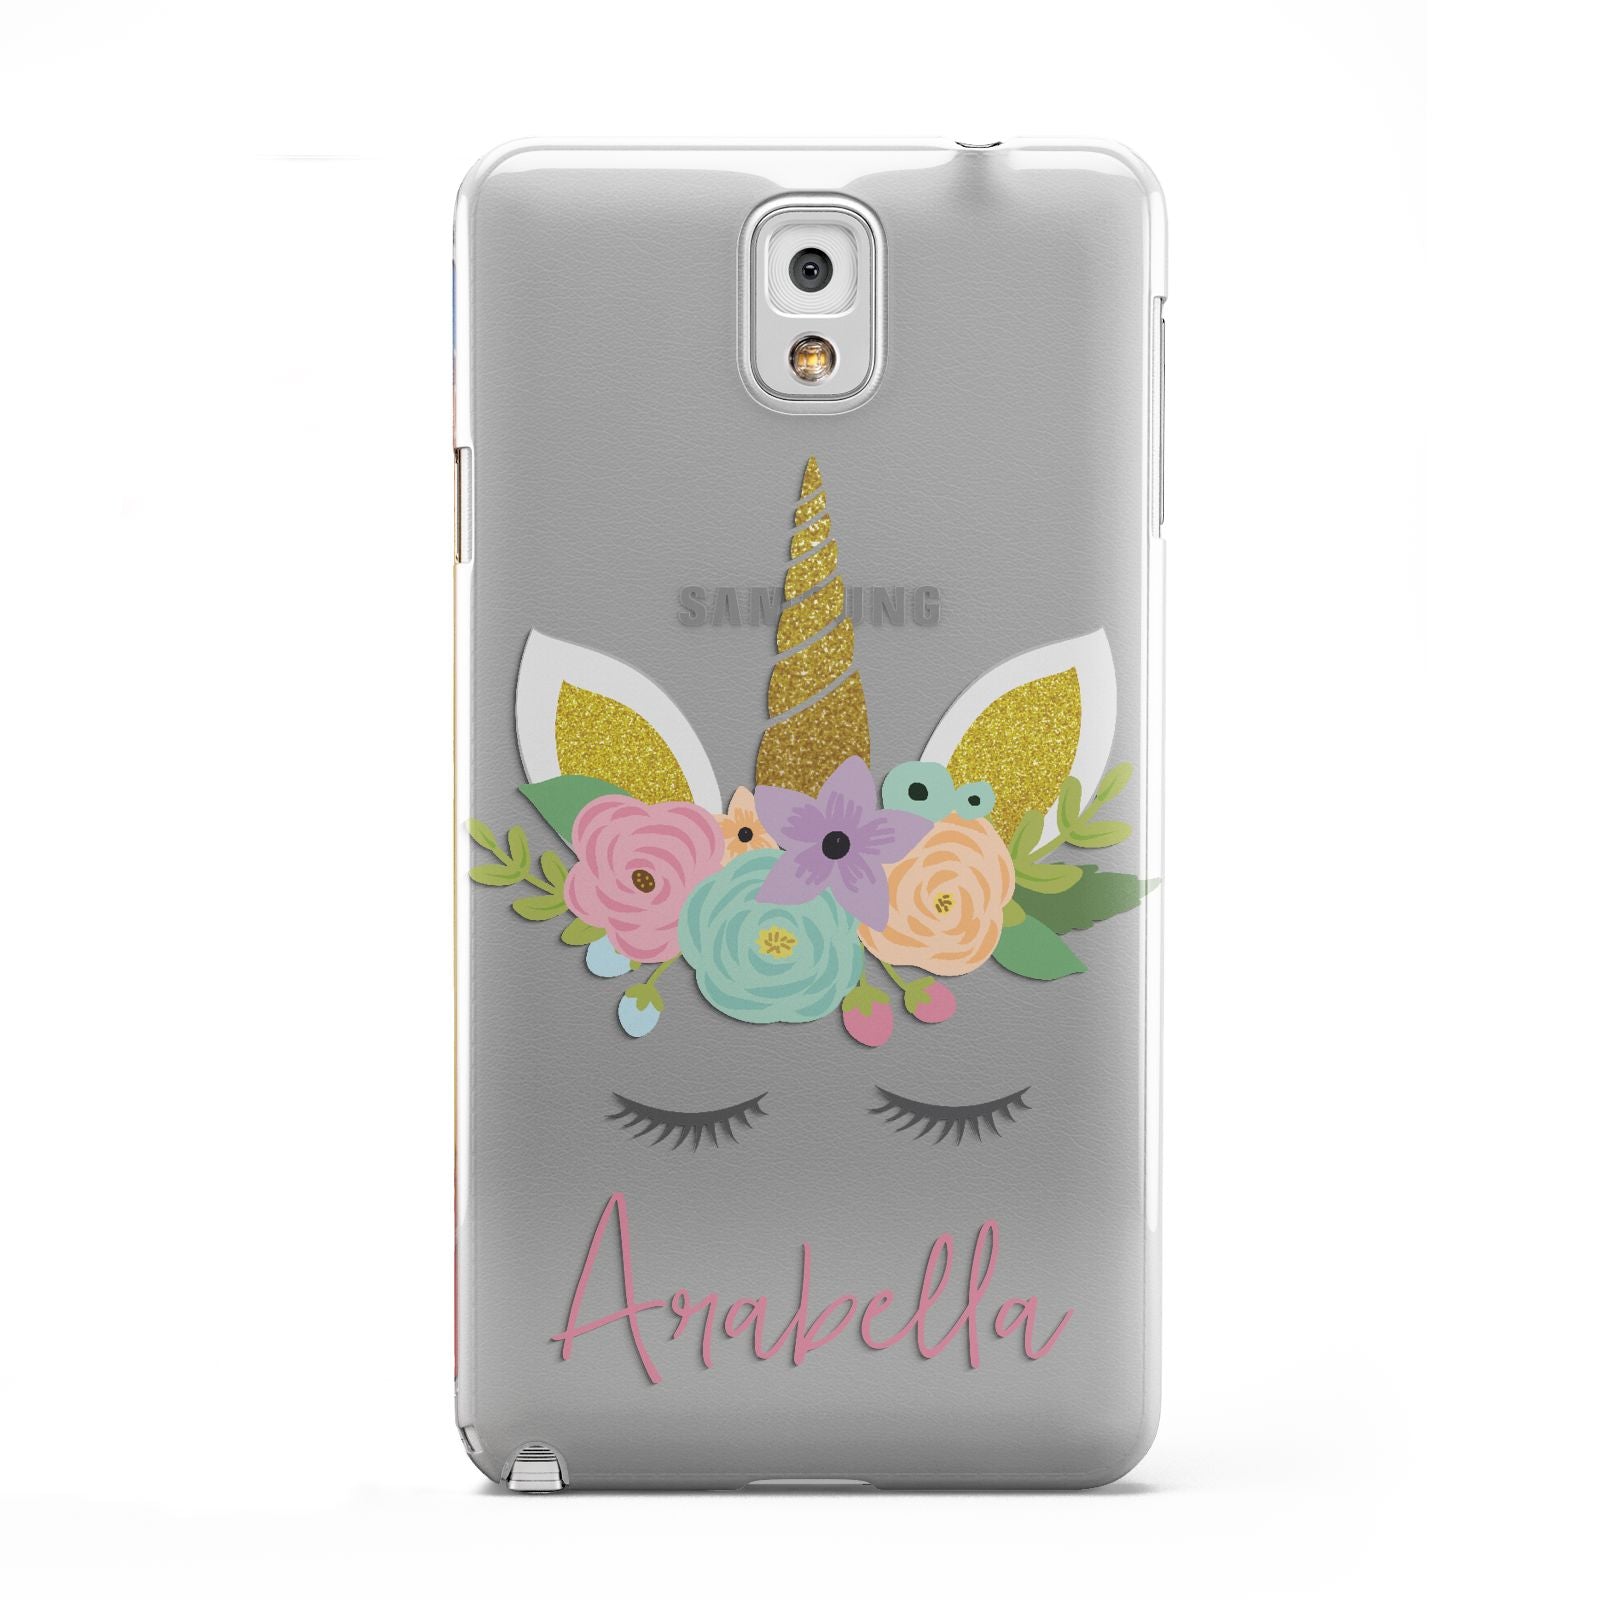 Personalised Unicorn Face Samsung Galaxy Note 3 Case